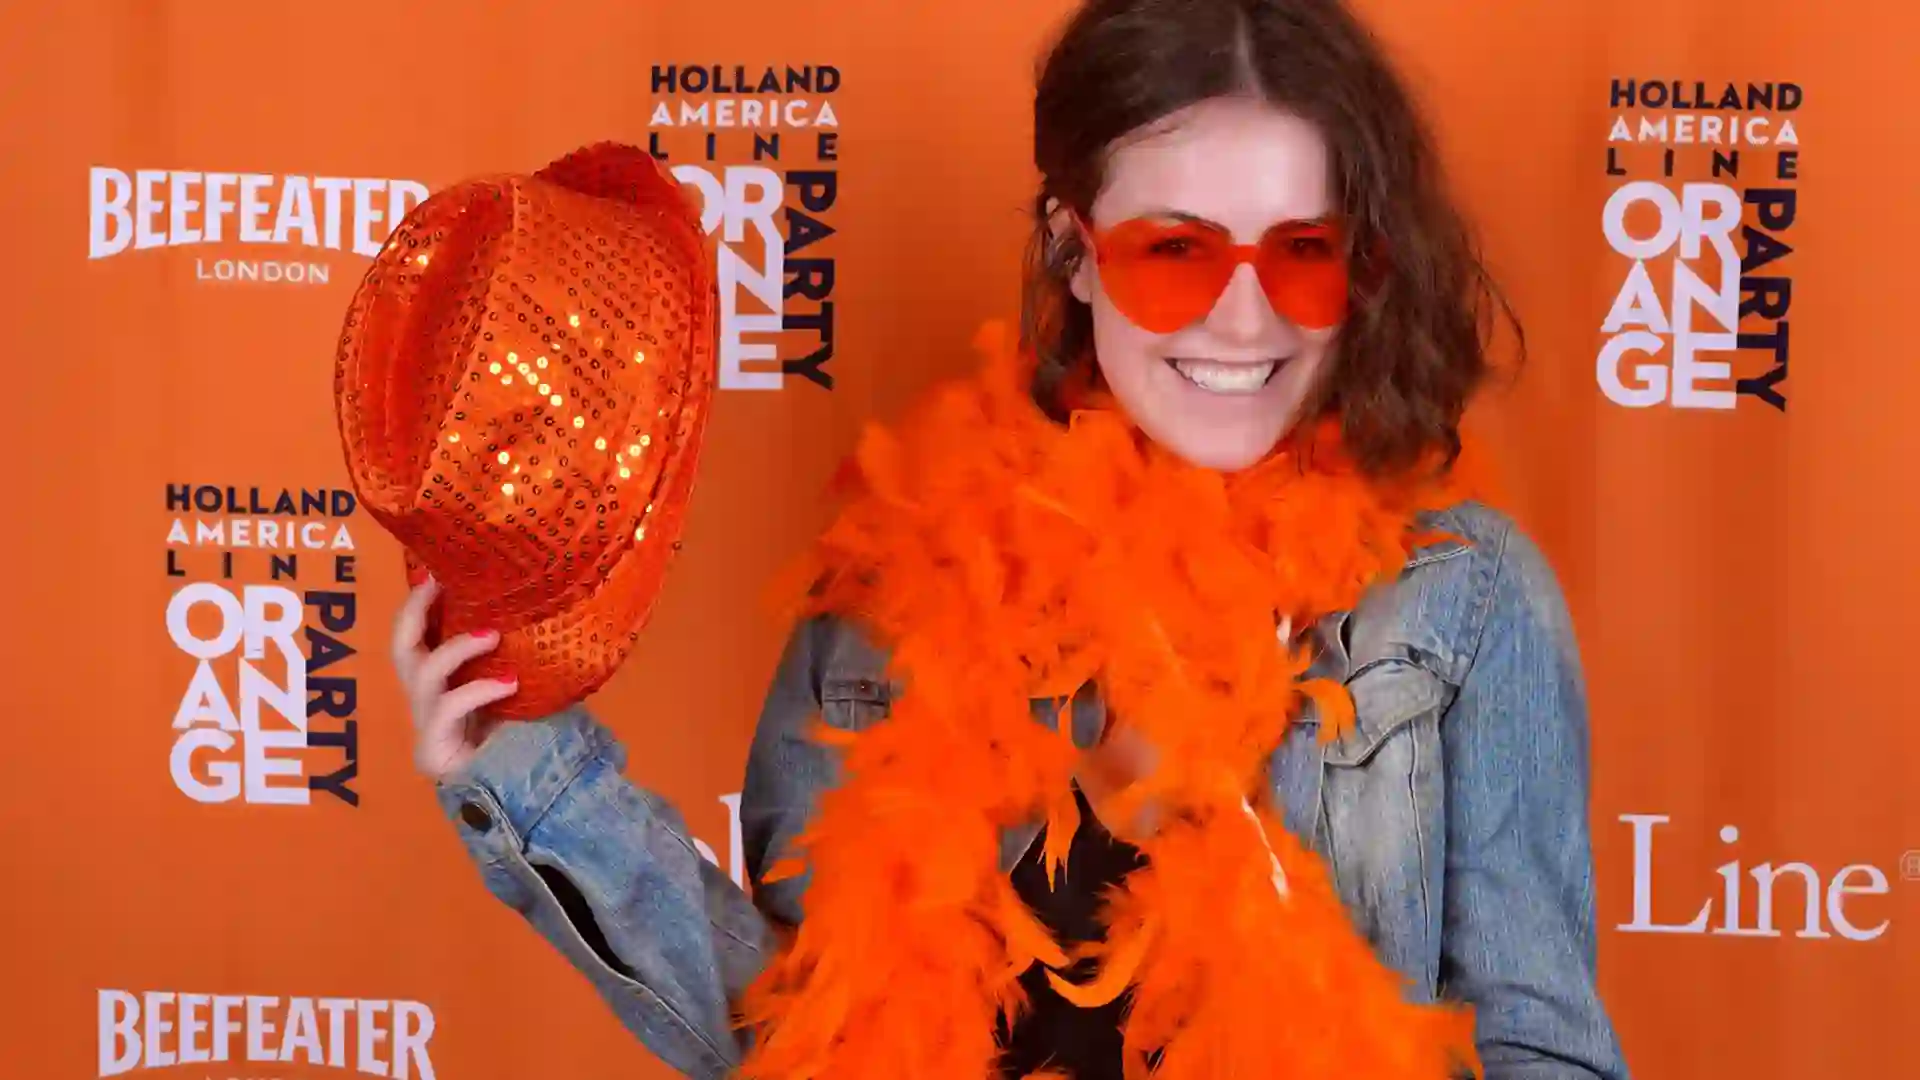 View of person wearing orange sunglasses and boa with hat, standing in front of Orange Party background.